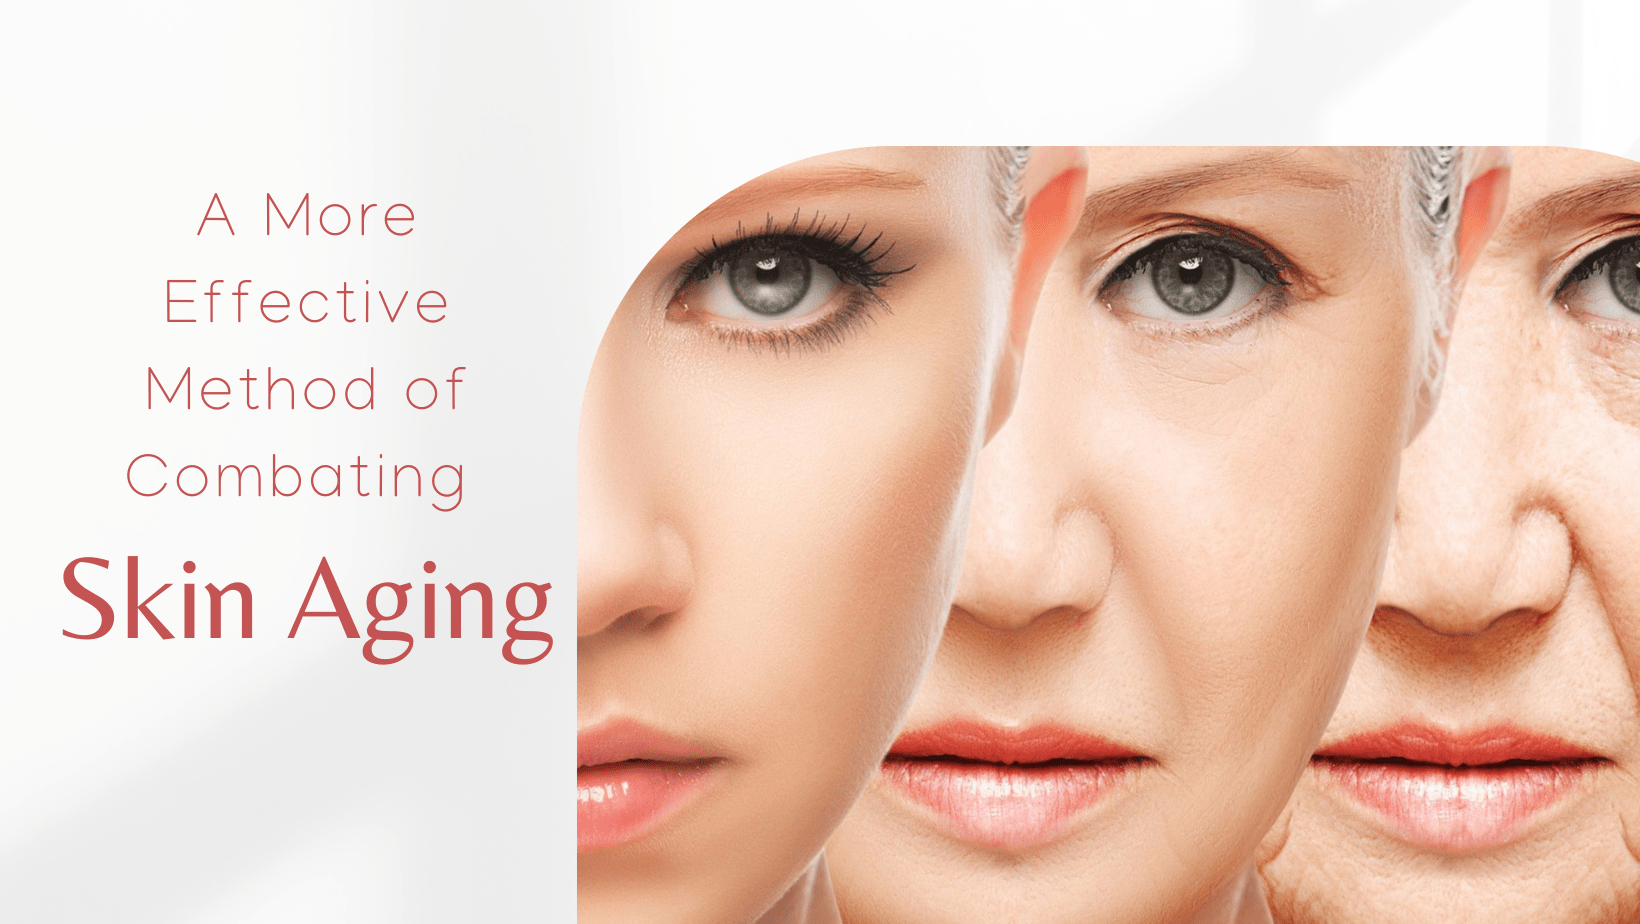 A More Effective Method of Combating Skin Aging